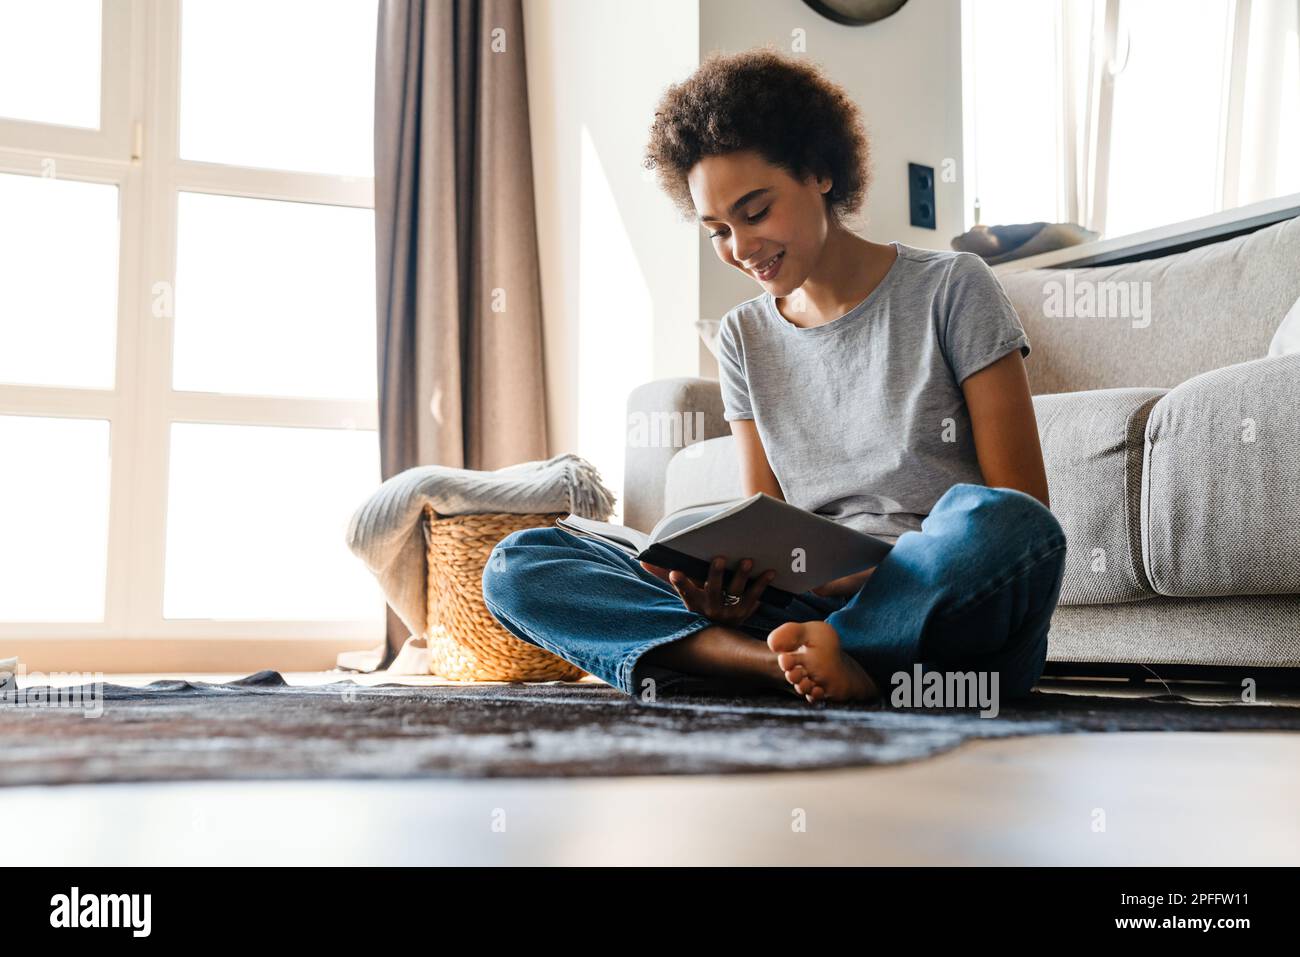 Young curly woman wearing jeans reading book while sitting on floor at home Stock Photo